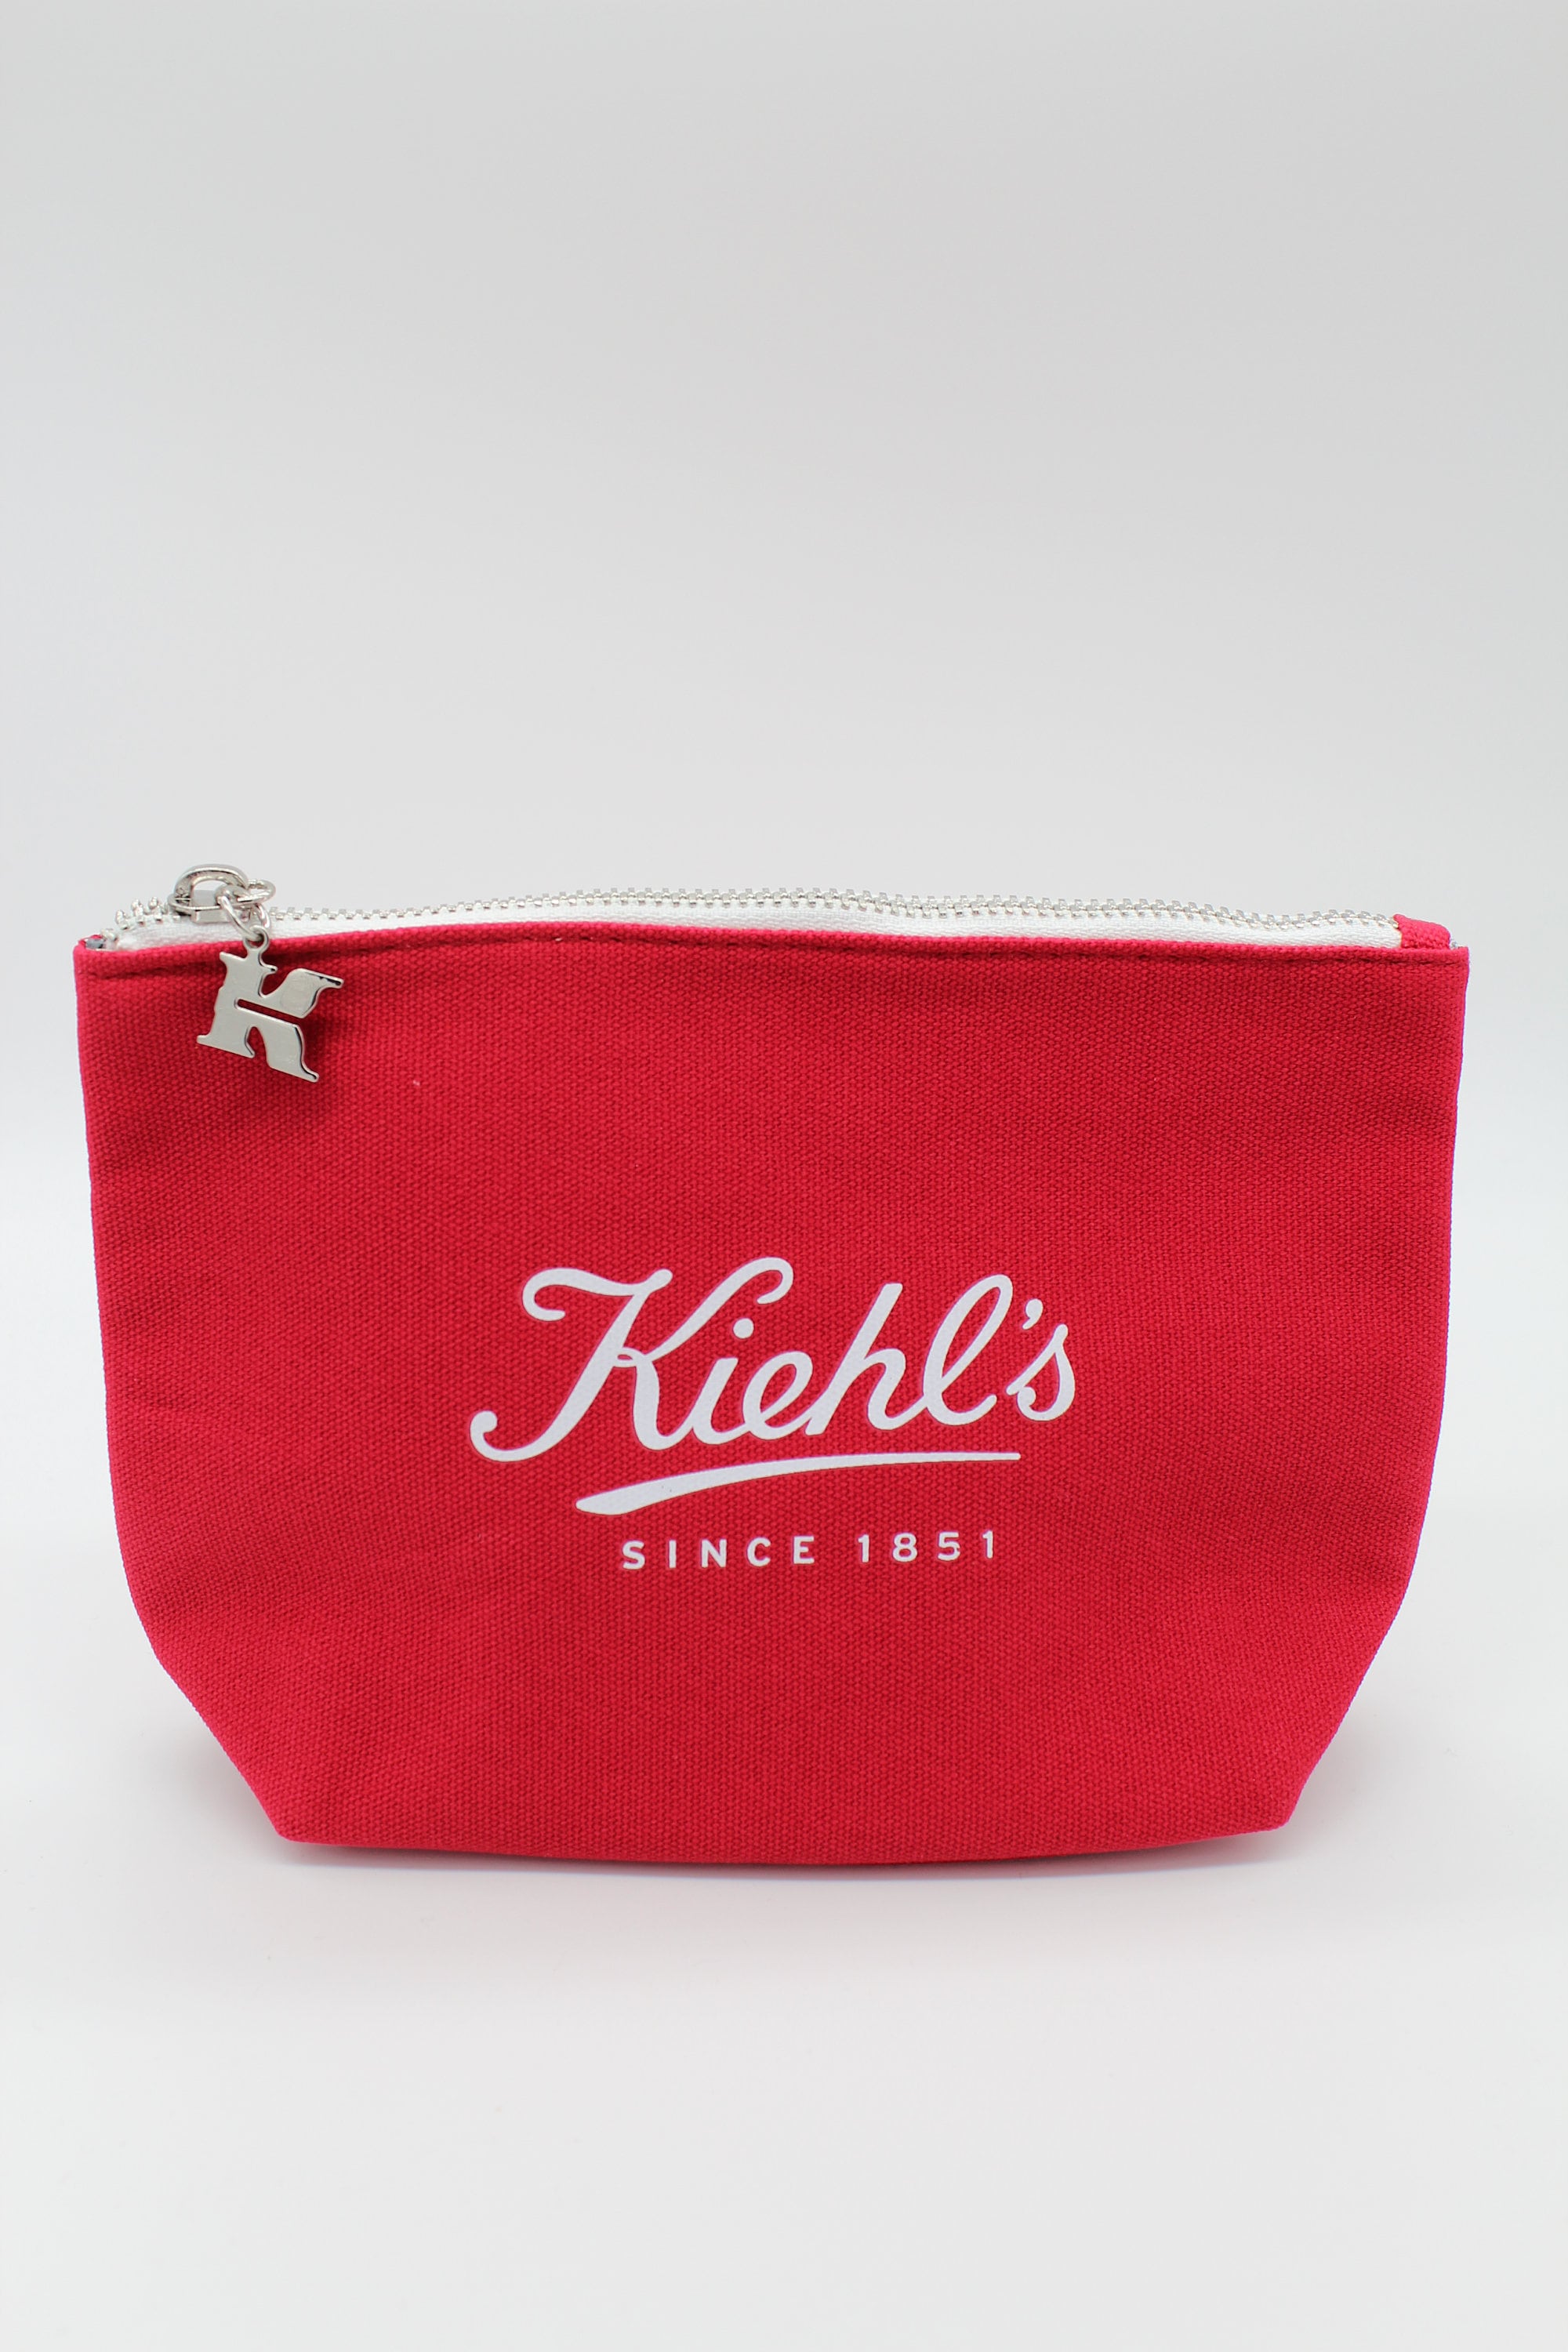 Kiehl's: FREE Full Size Cleanser + 5 Minis To Go + a Tote Bag for Cyber  Monday! | Milled